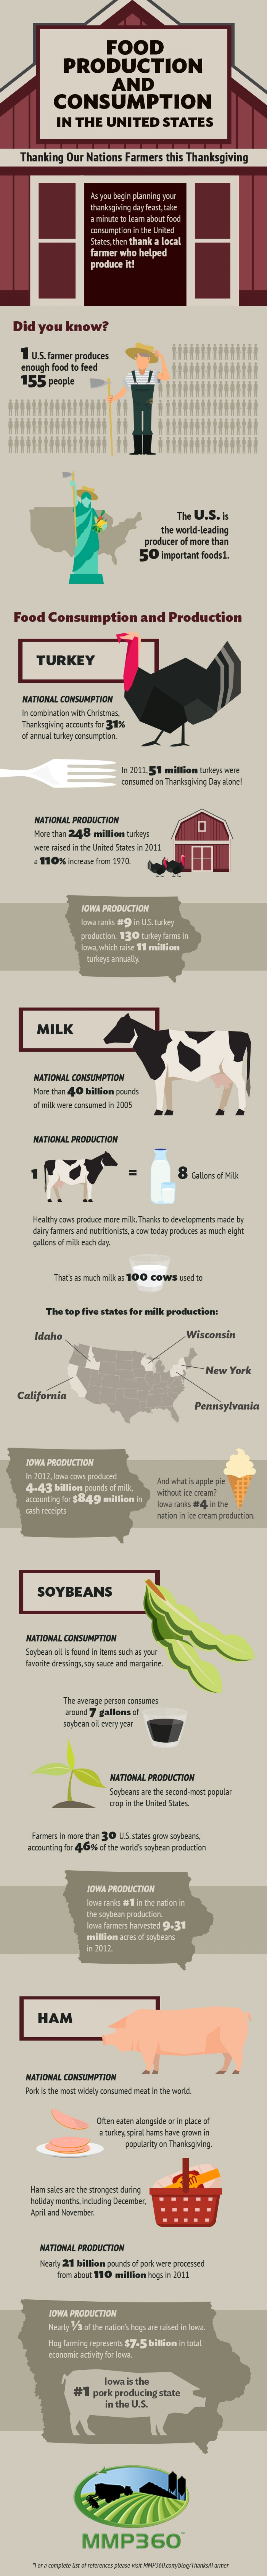 Thanking Farmers this Thanksgiving Infographic